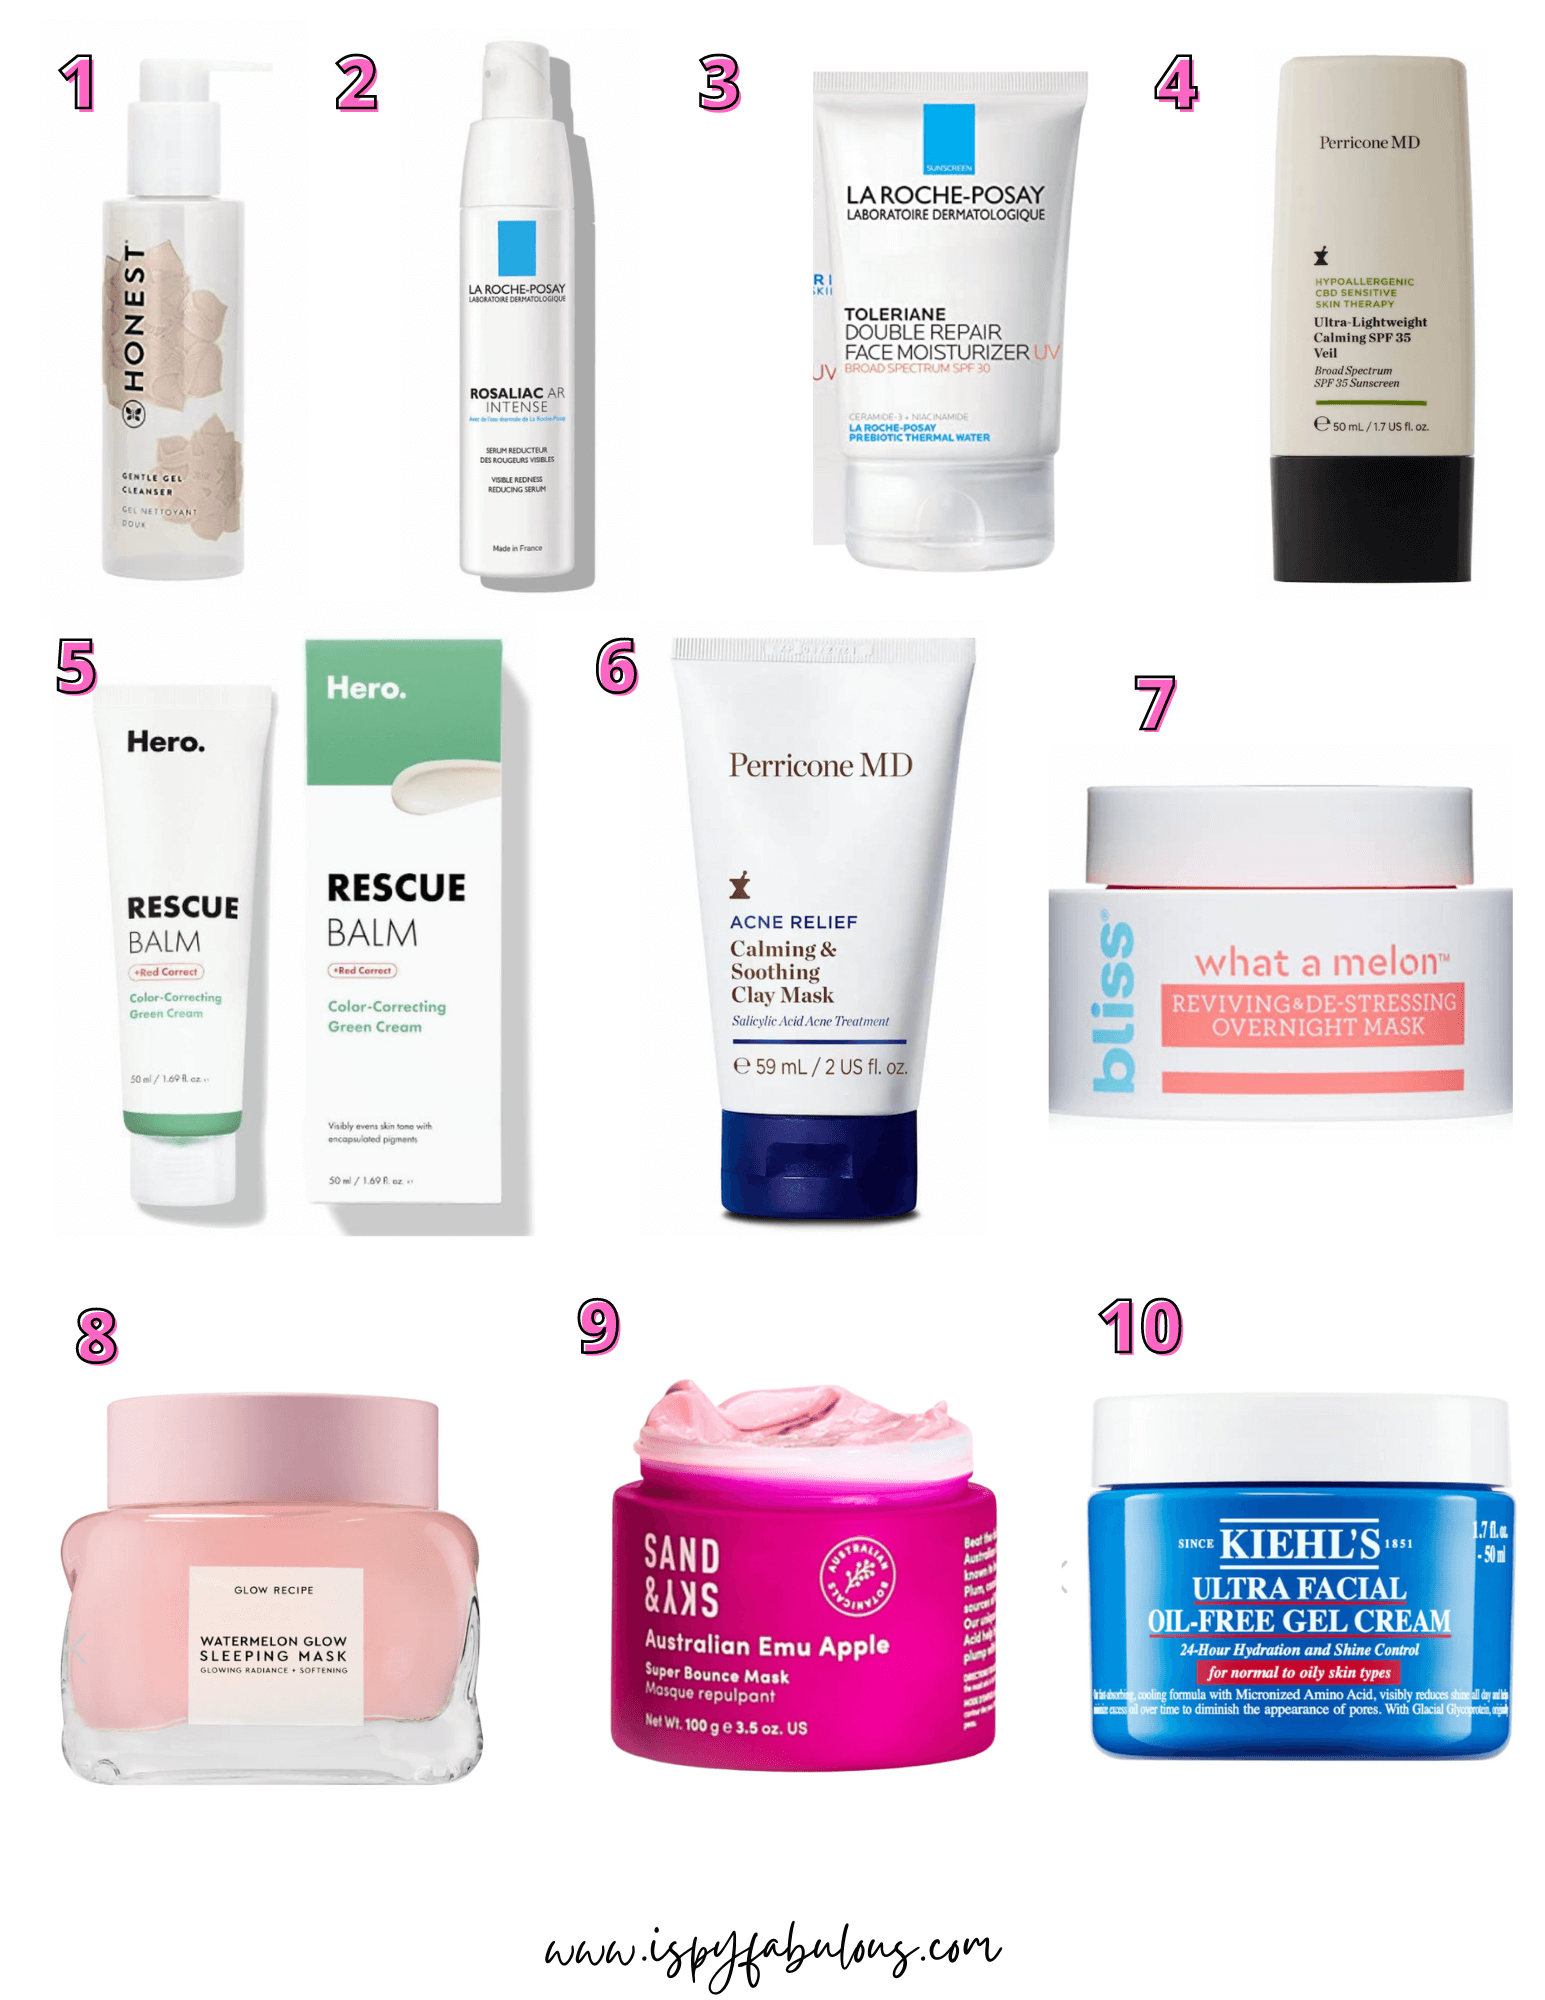 products for reducing redness from rosacea, acne, lupus, and more